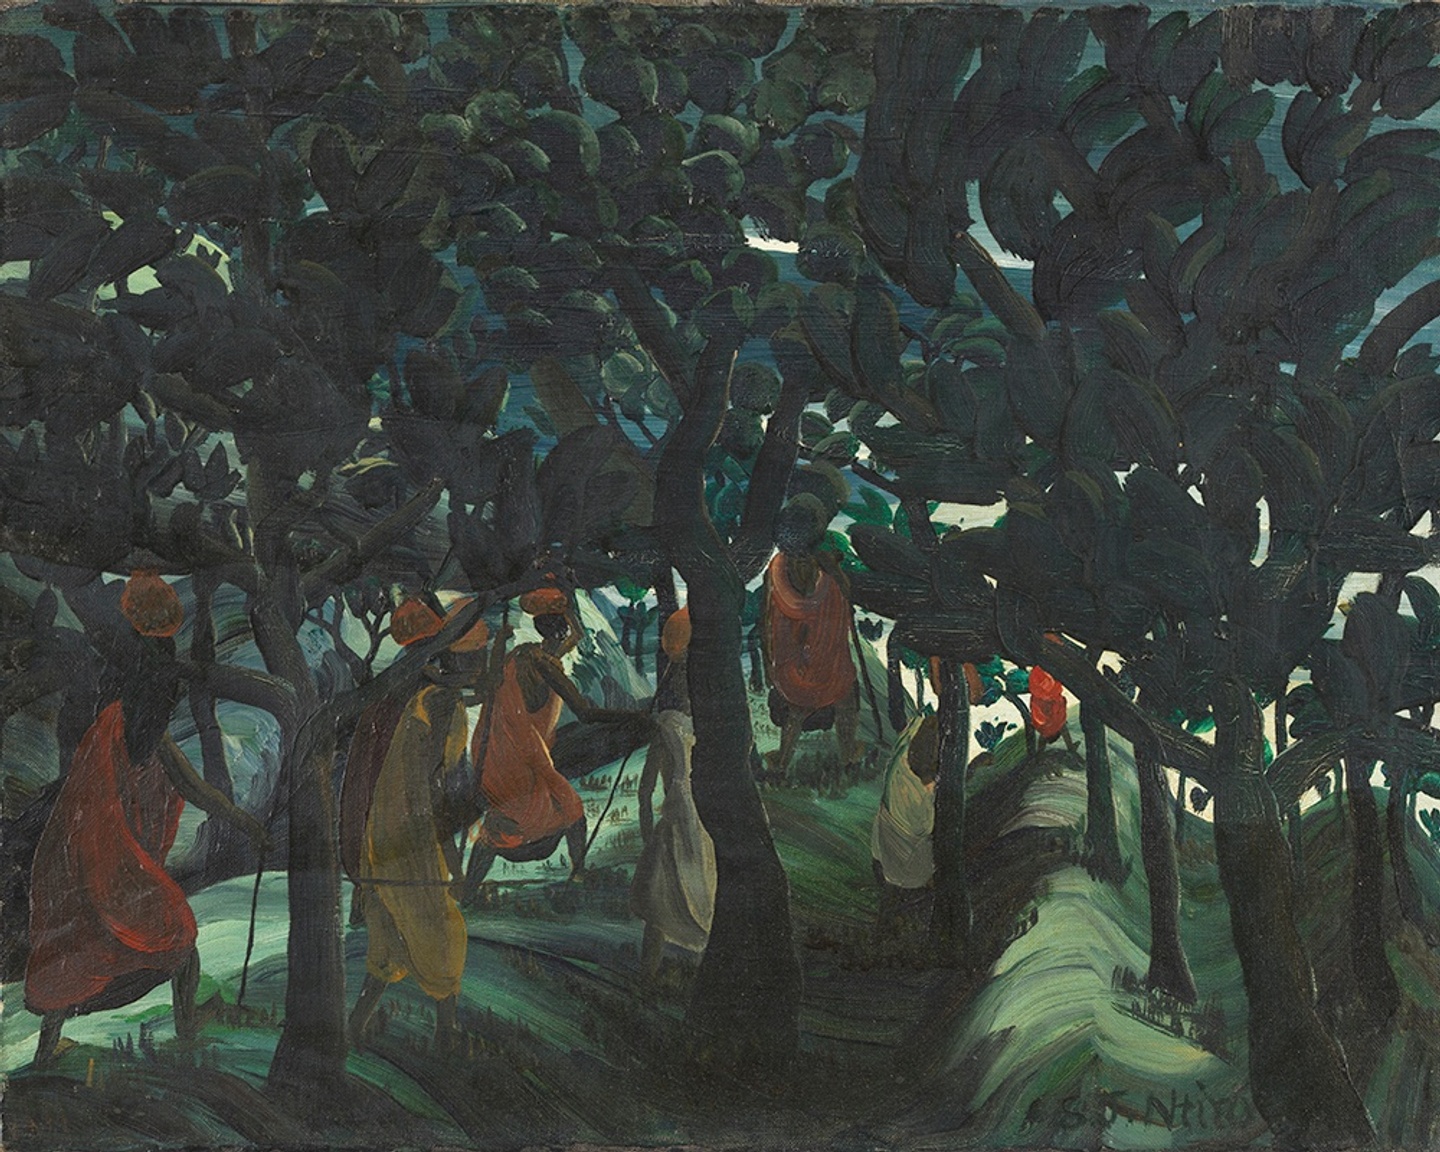 A painting of figures walking through an orchard